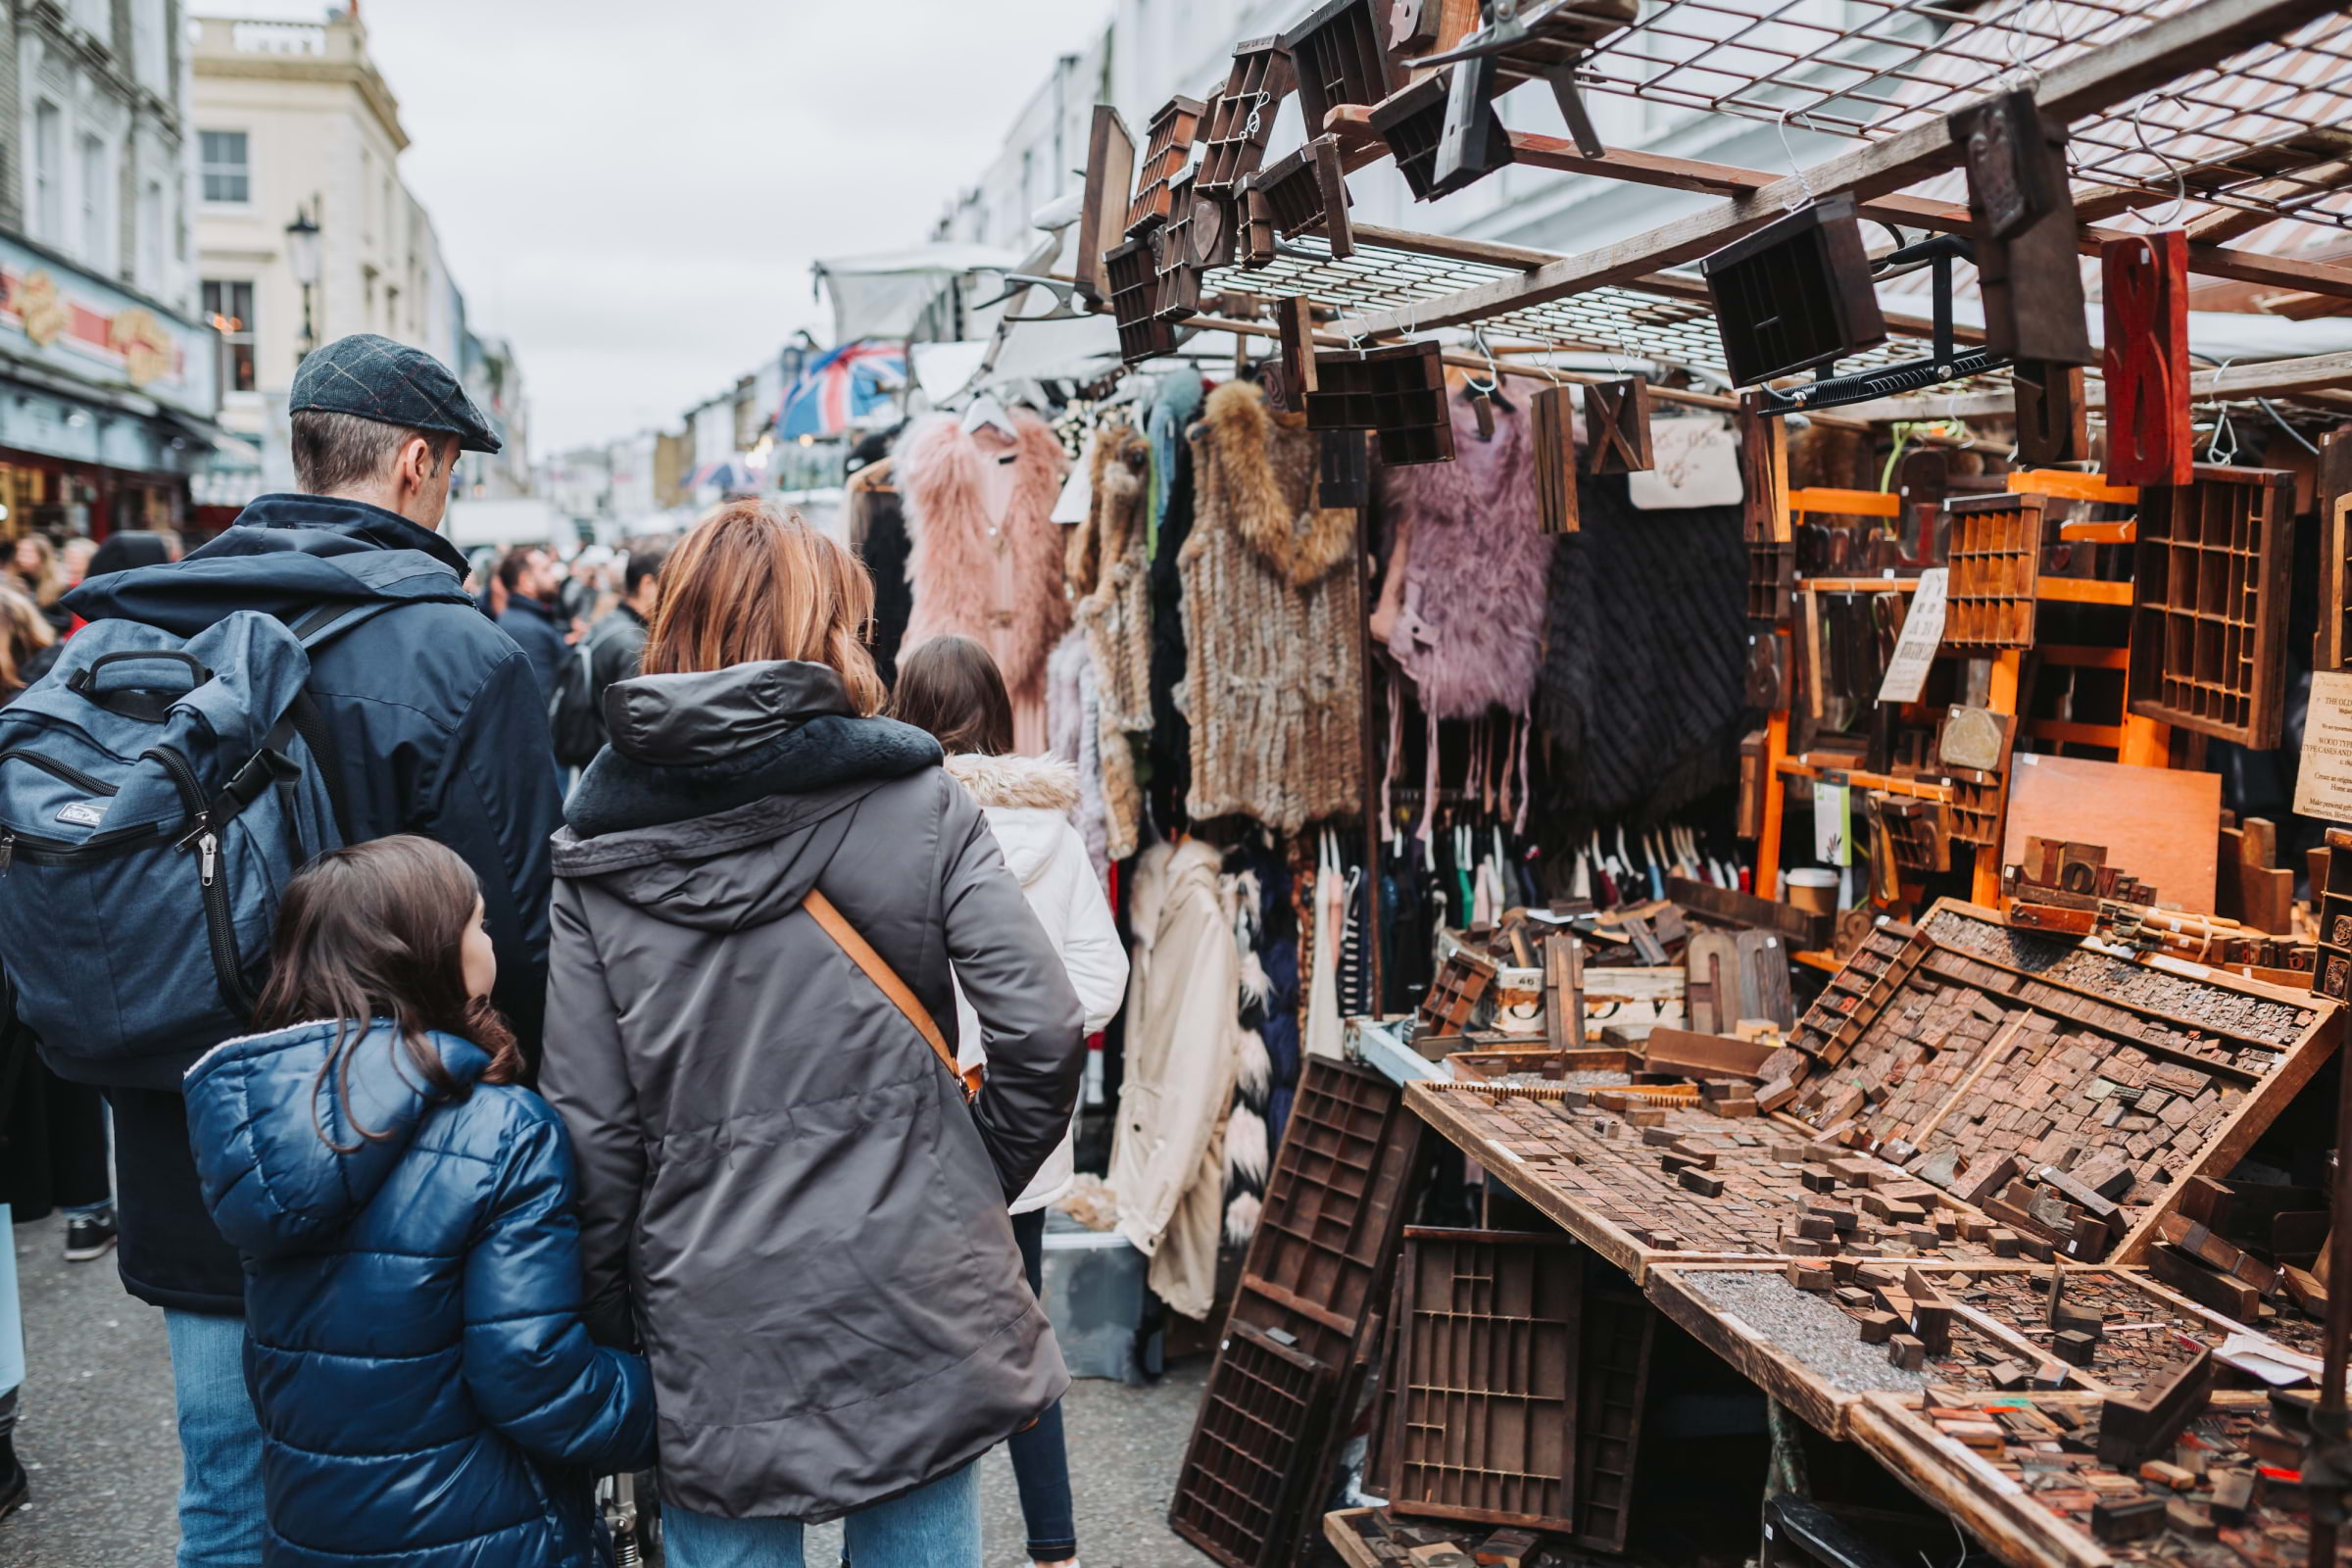 Guide to affordable shopping in London